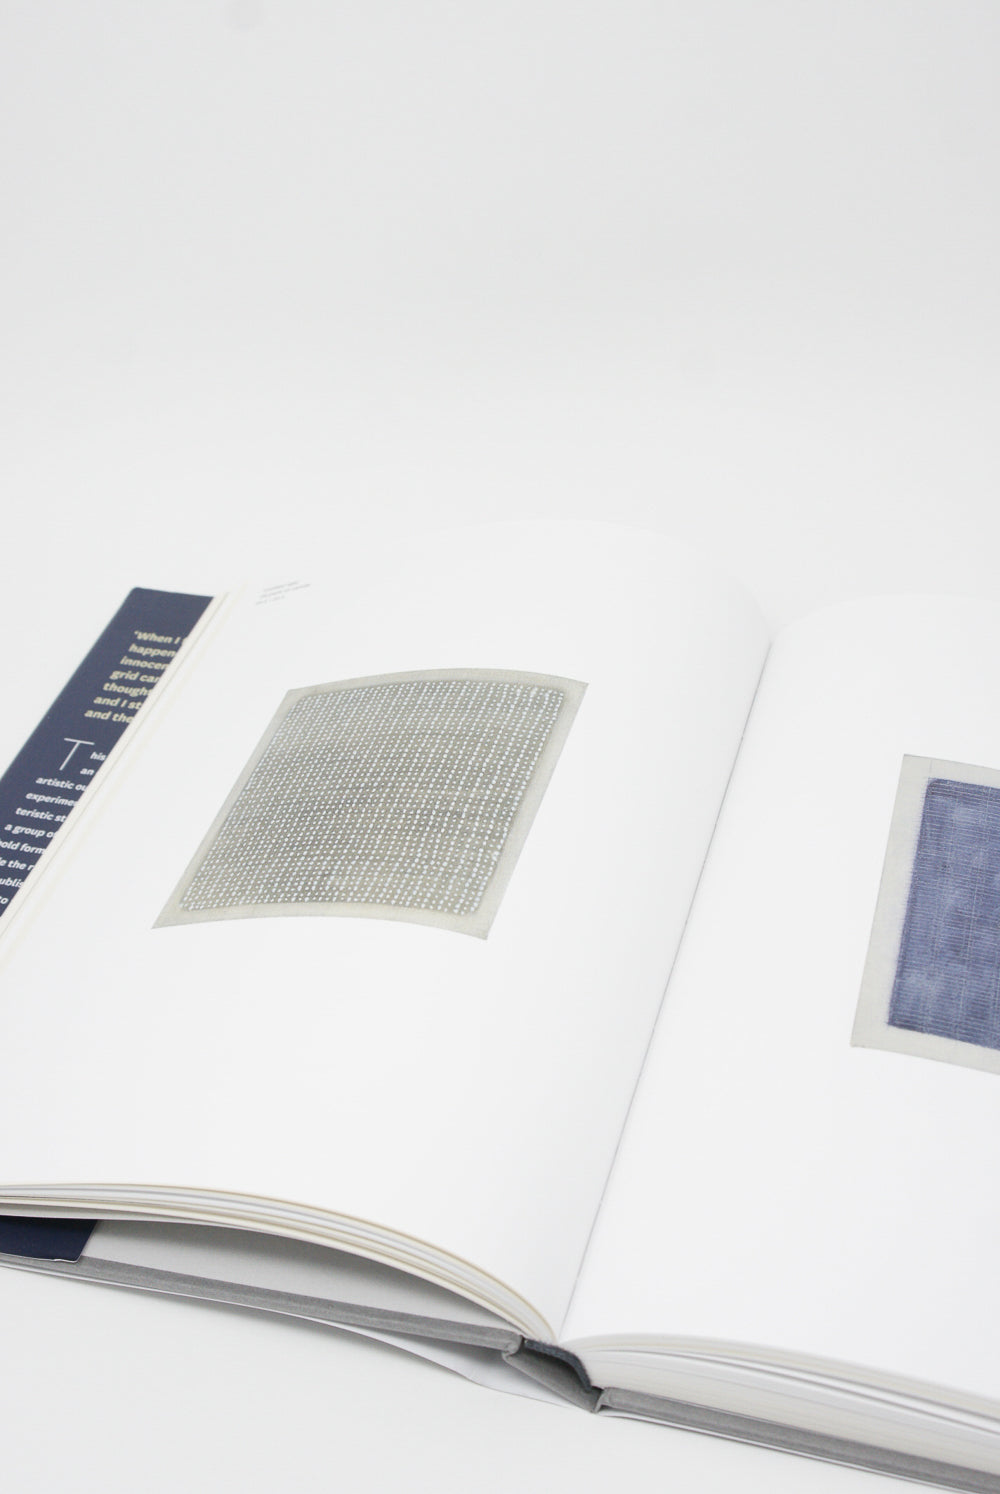 An open book featuring a retrospective exhibition on Agnes Martin, with text and images on a white surface. Product: Artbook/D.A.P.'s Agnes Martin: Illustrated Monograph.